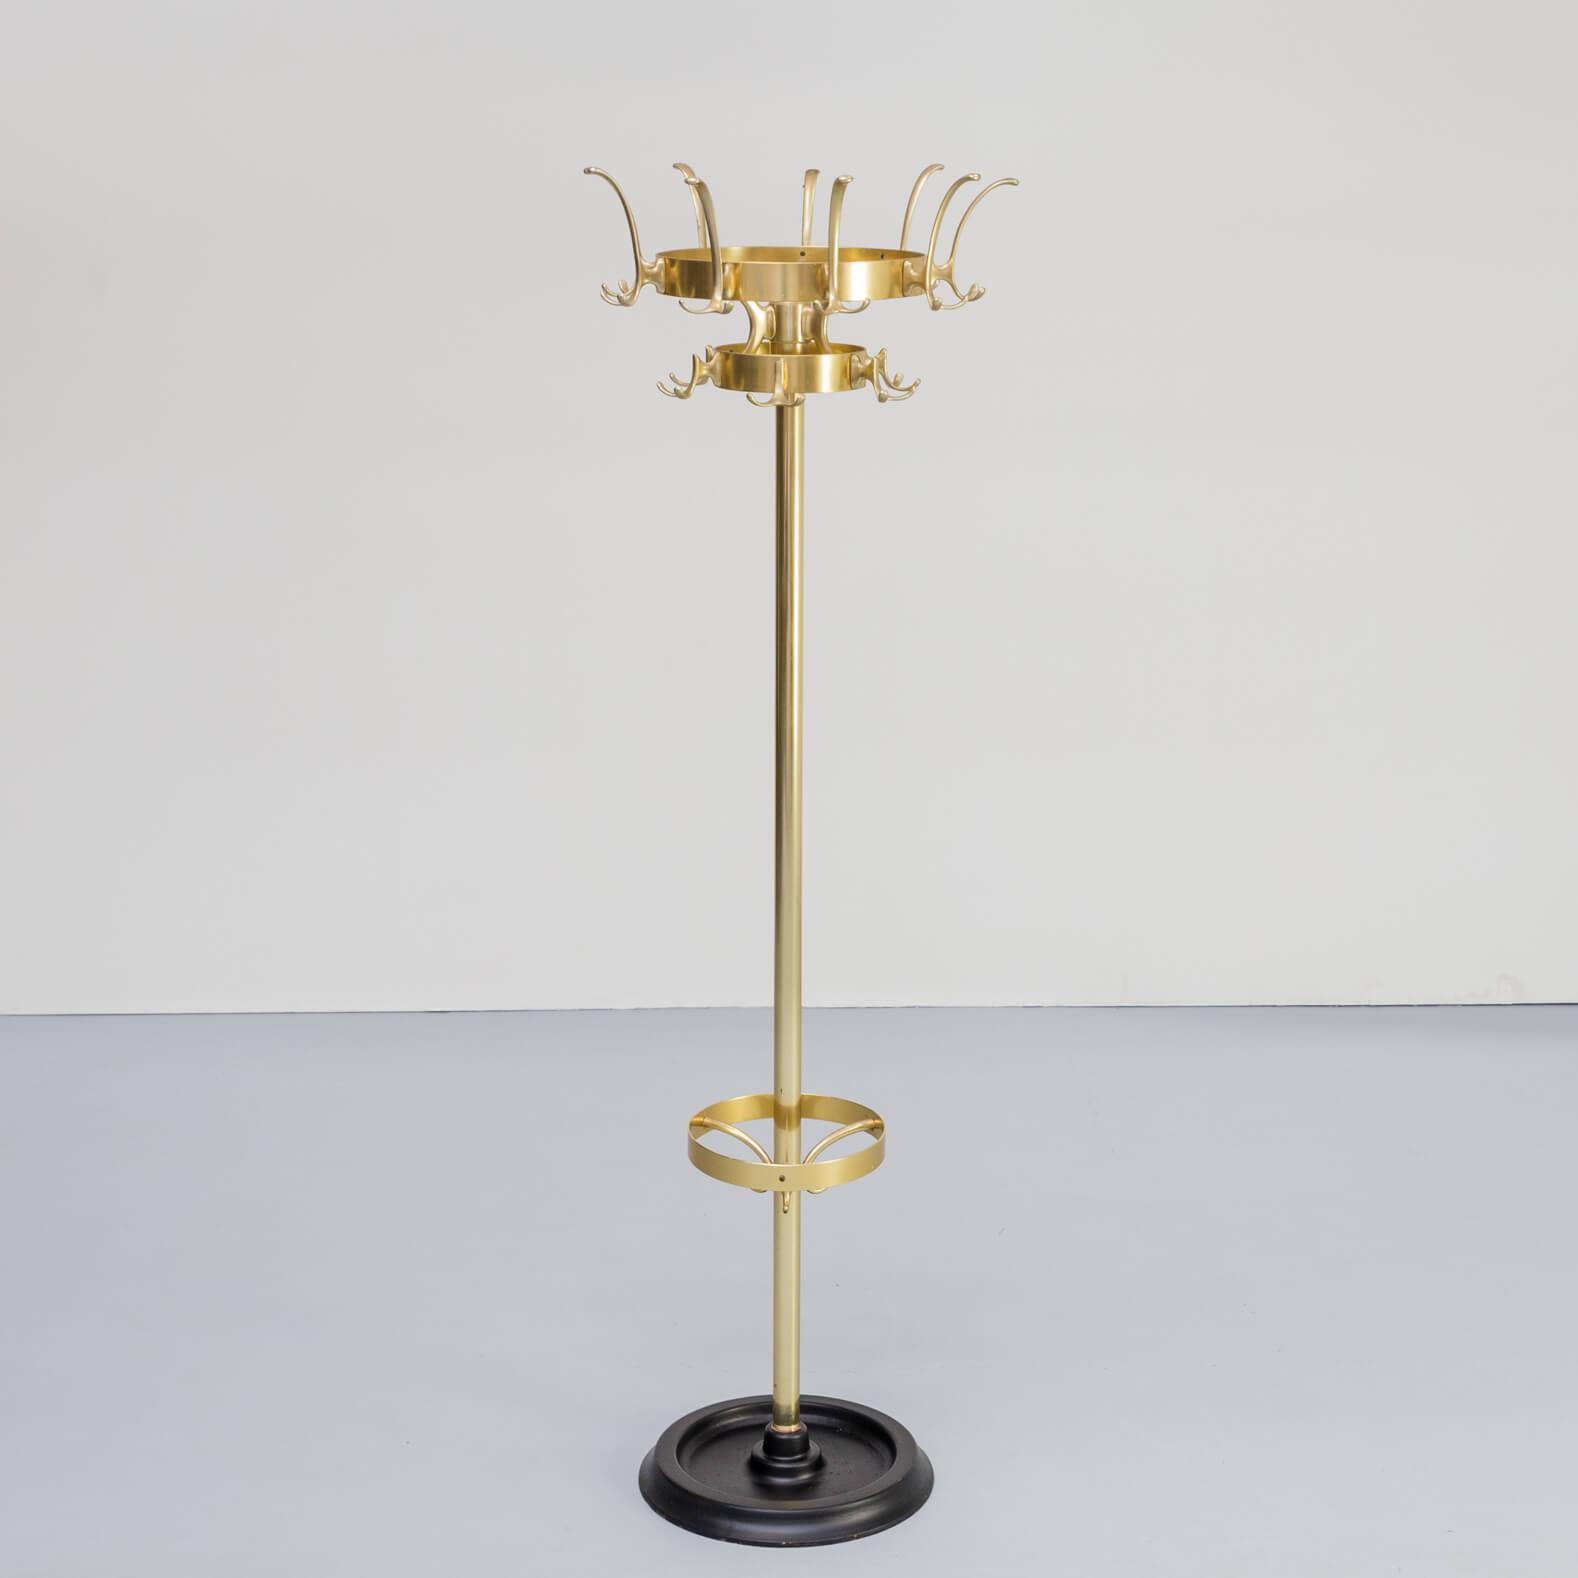 1960s beautiful brass round freestanding coat rack in heavy quality. The brass pole in 1 piece with umbrella stand mounted. Foot in cast iron. Good condition consistent with age and use.